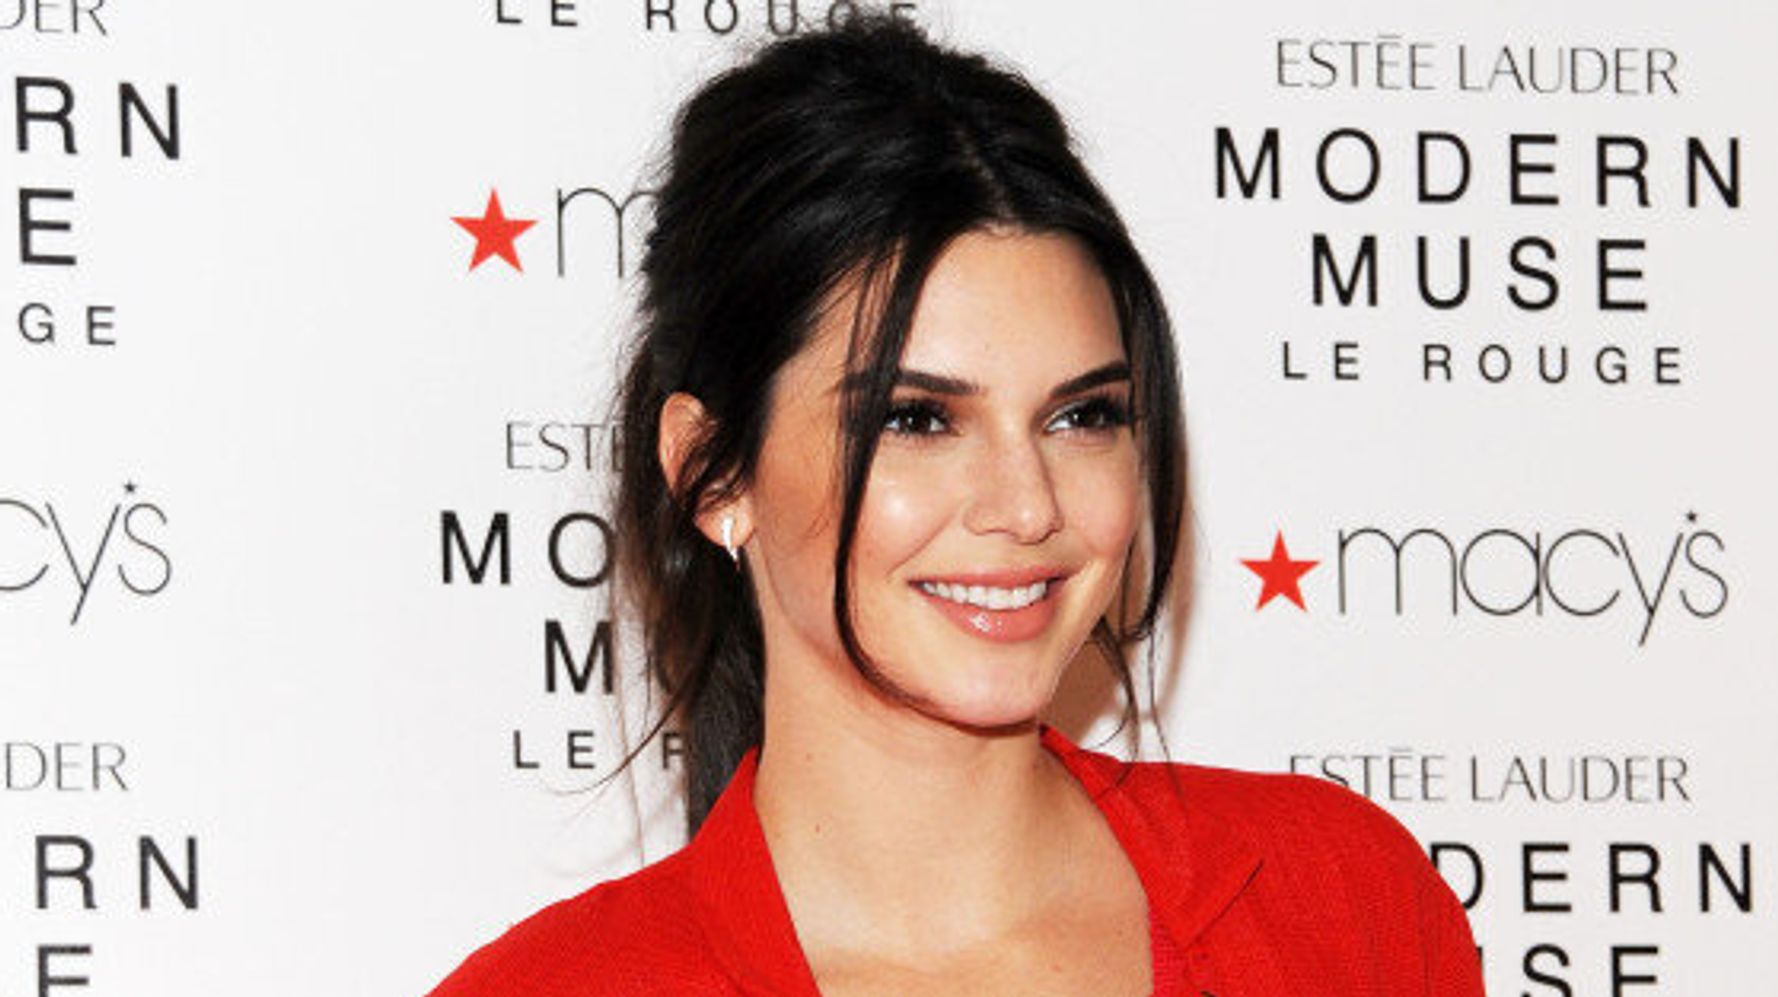 See Kendall Jenner's Sexy New Photo Shoot for Estée Lauder